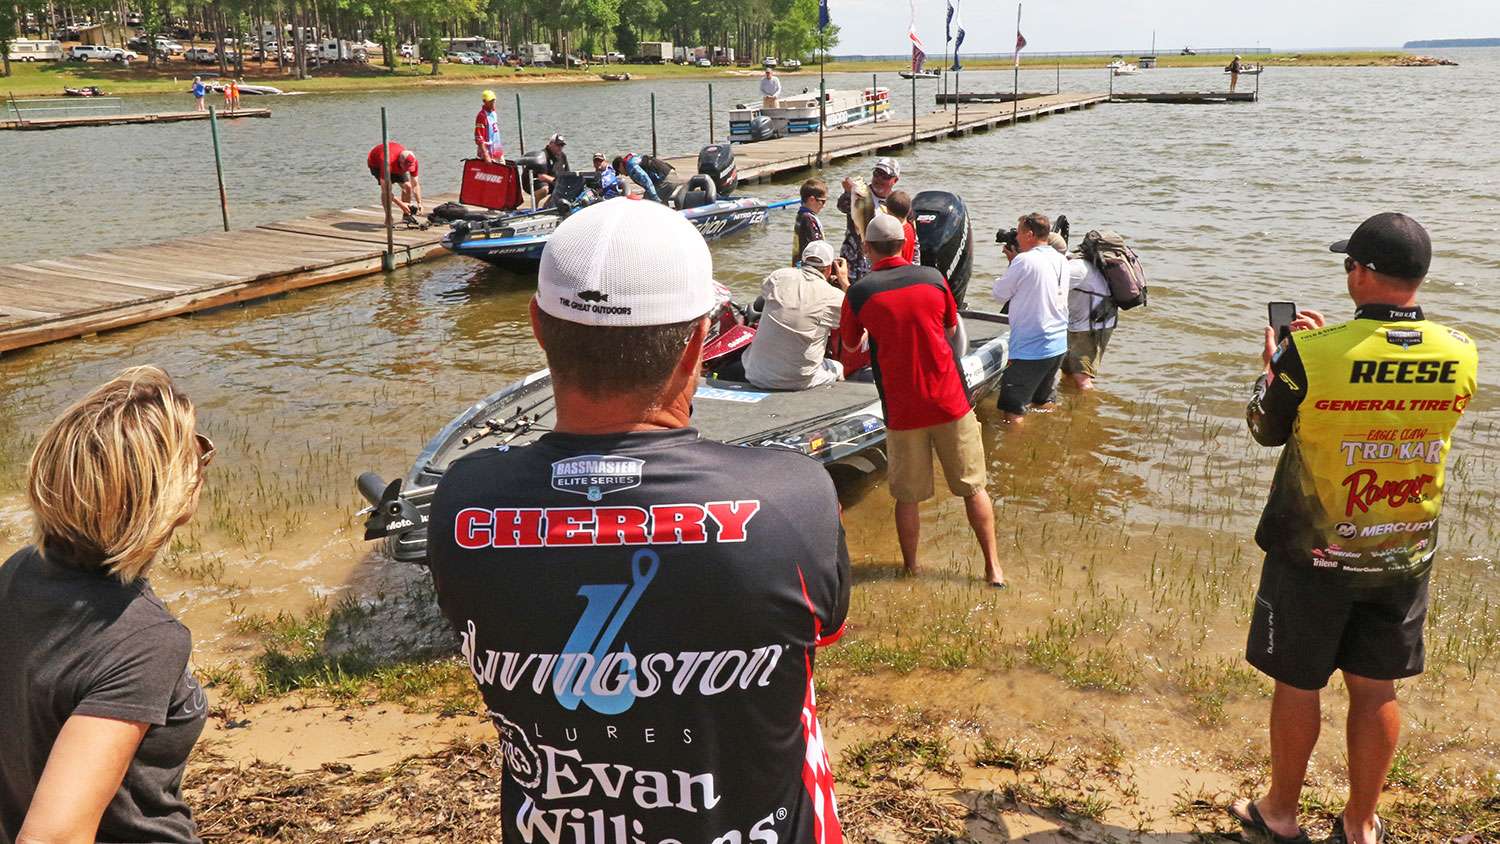 Cherry and Crews missed the Top 12 cut for Championship Sunday. Today is special, though. One of the most likeable anglers on the tour is in contention to win. Cherry and his peers want to see veteran angler John Murray win his first Bassmaster Elite title.
